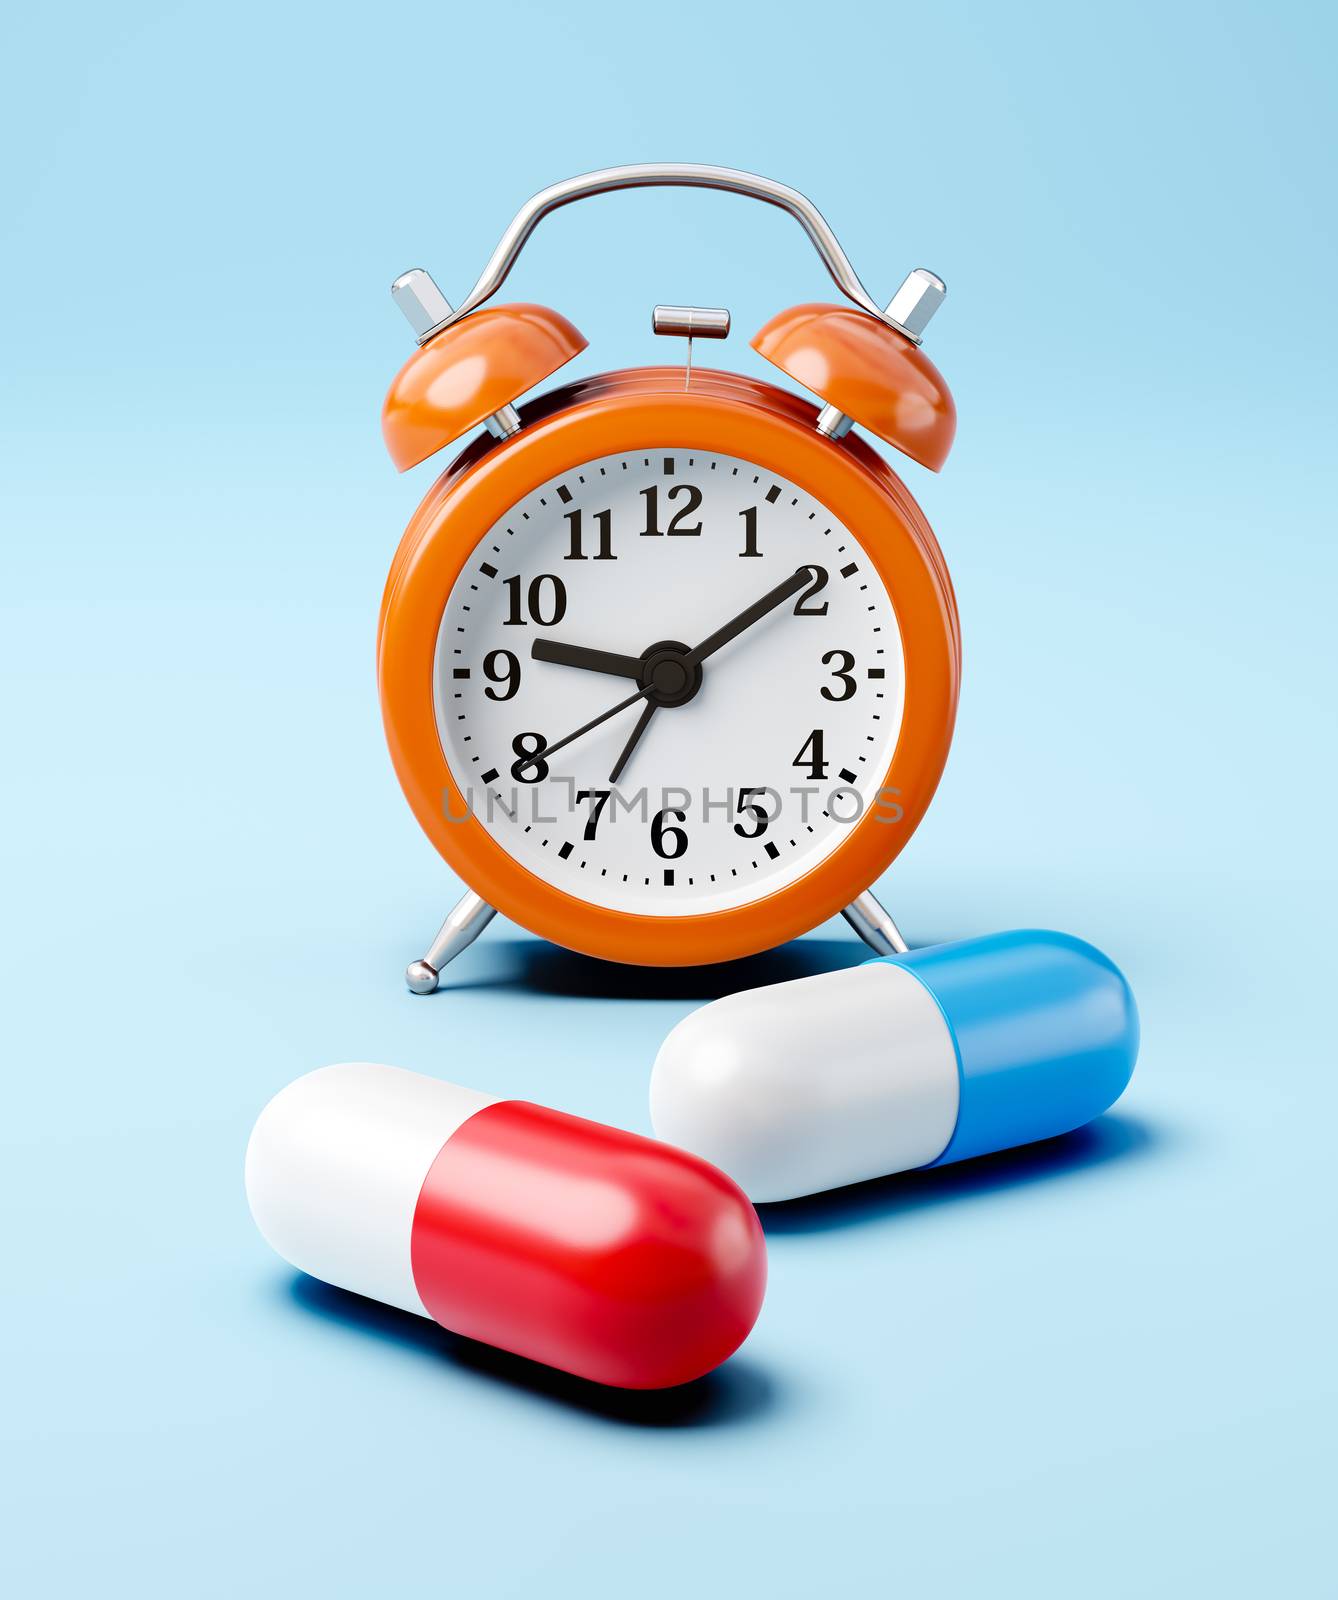 Two Red and Blue Pills and an Orange Alarm Clock on Light Blue Background 3D Illustration